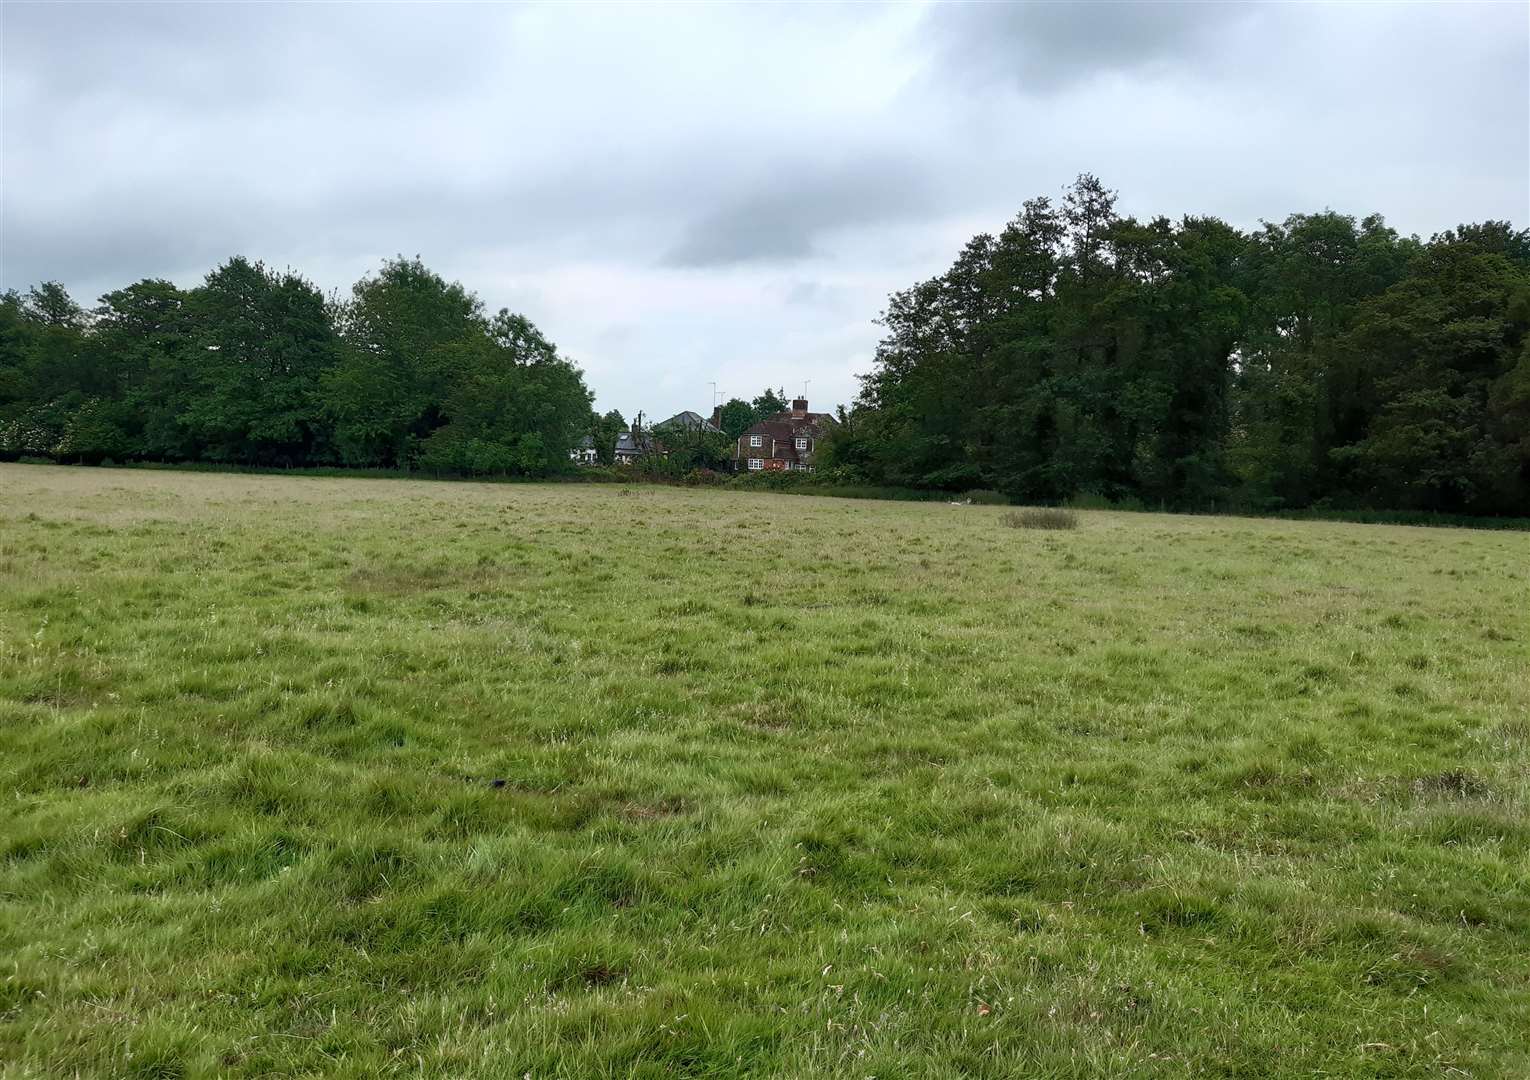 This part of a sheep field off Ball Lane will be turned into football pitches